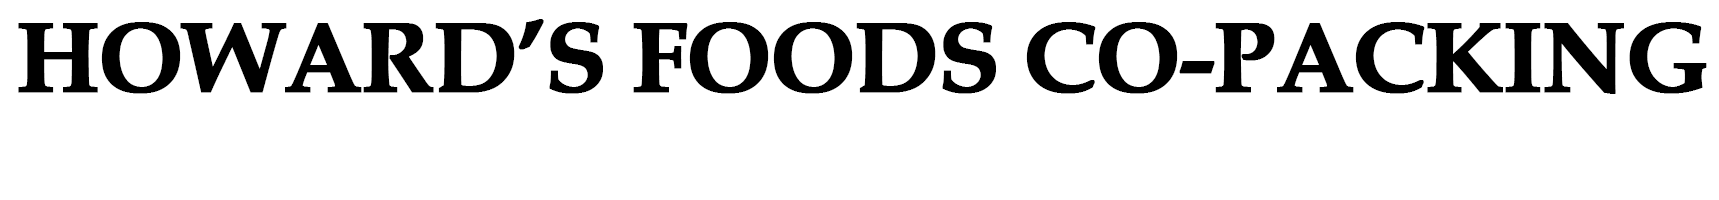 Howard's Foods & Co-Packing